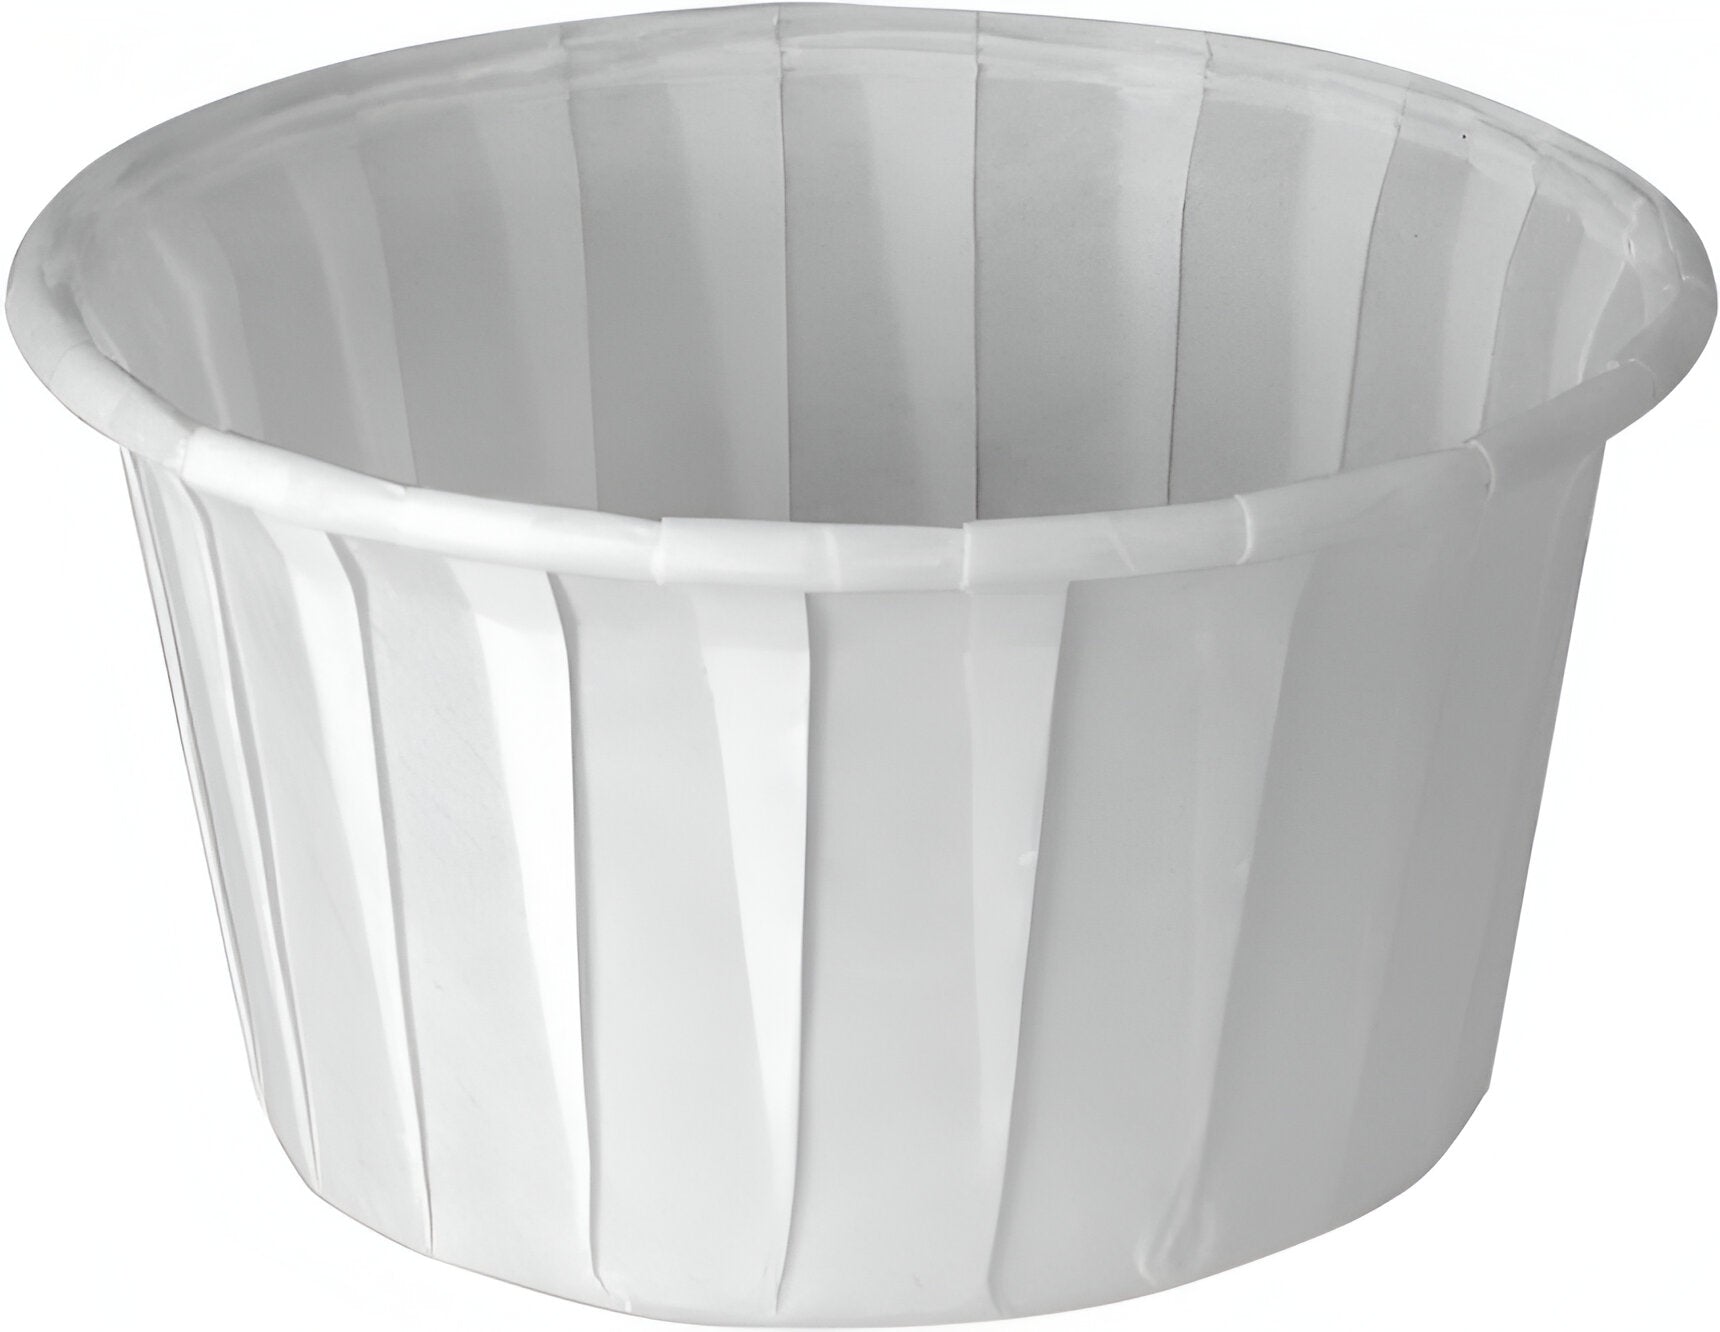 Dart Container - 4 Oz Solo White Paper Portion Cups, 250/Cs - 400-2050